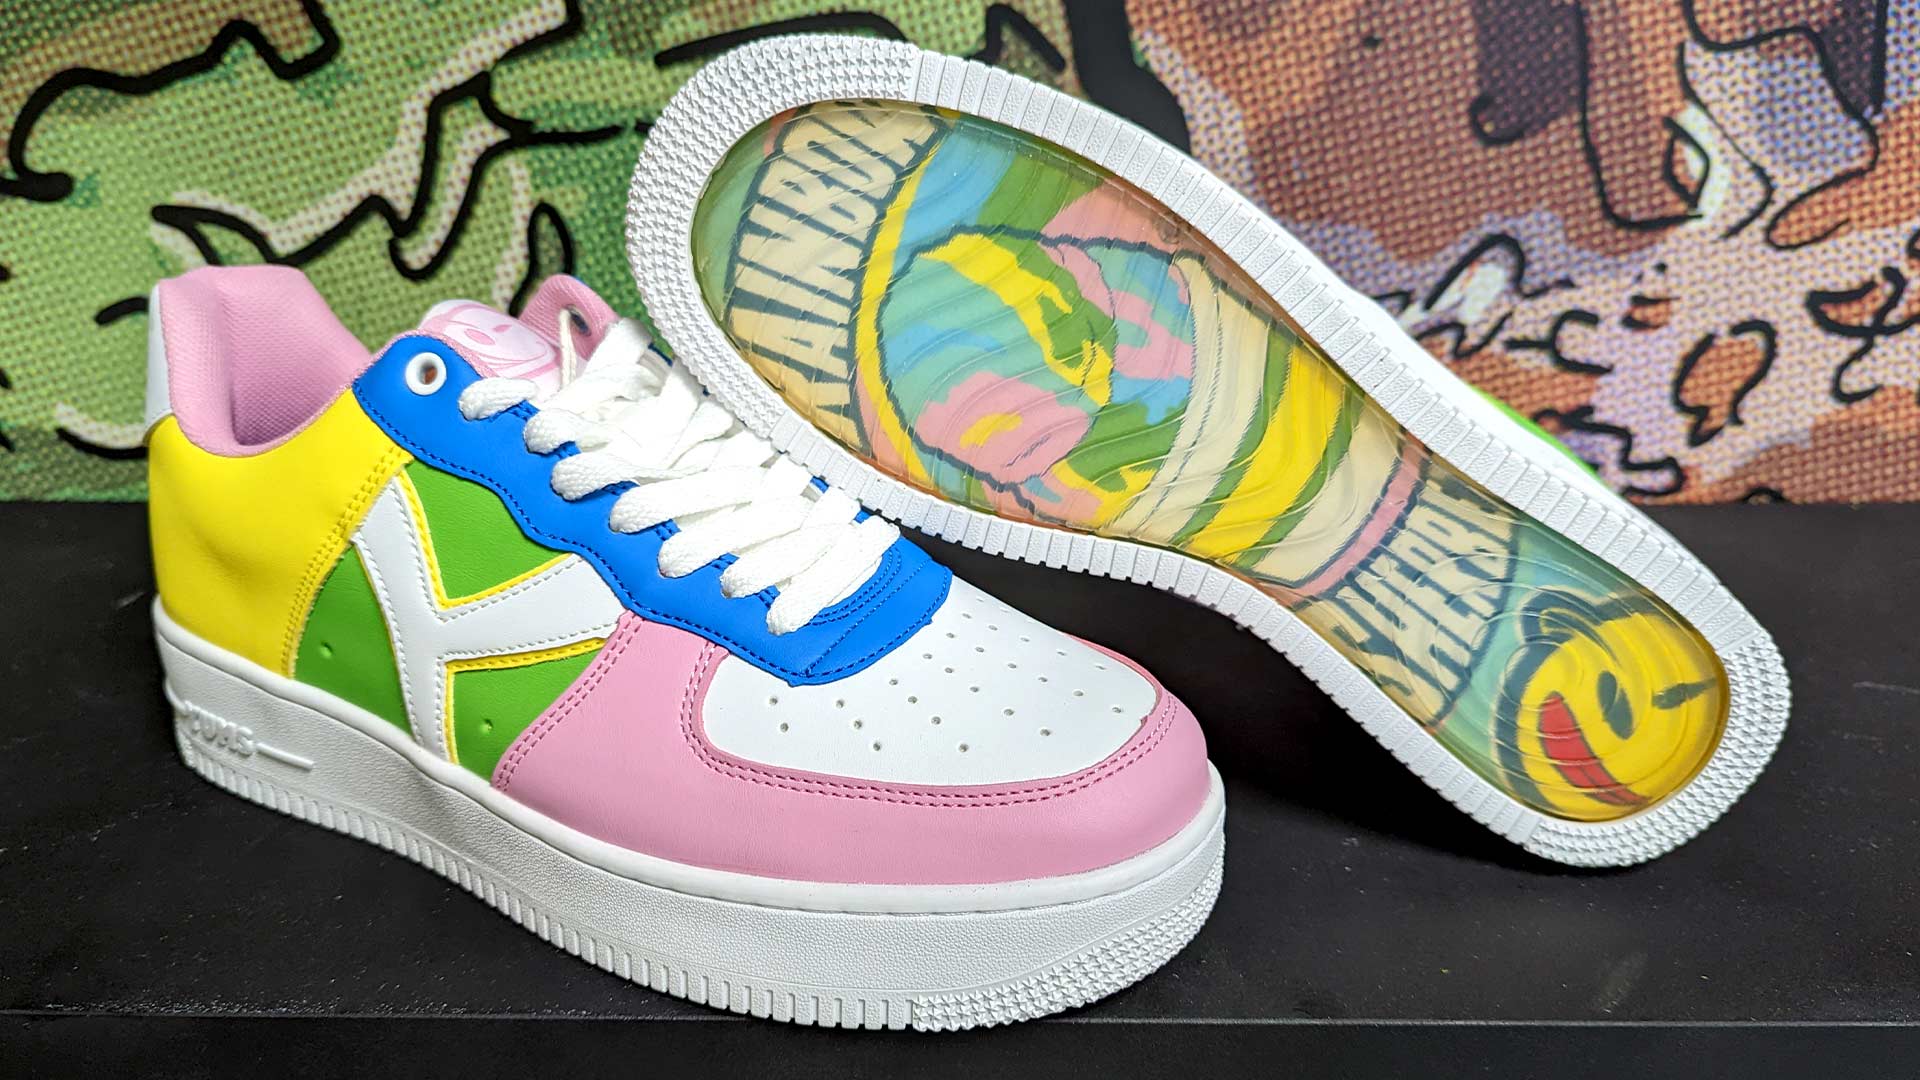 YUMS Sneakers Flavor Rainbow Sherbet at Dope Street Shoes